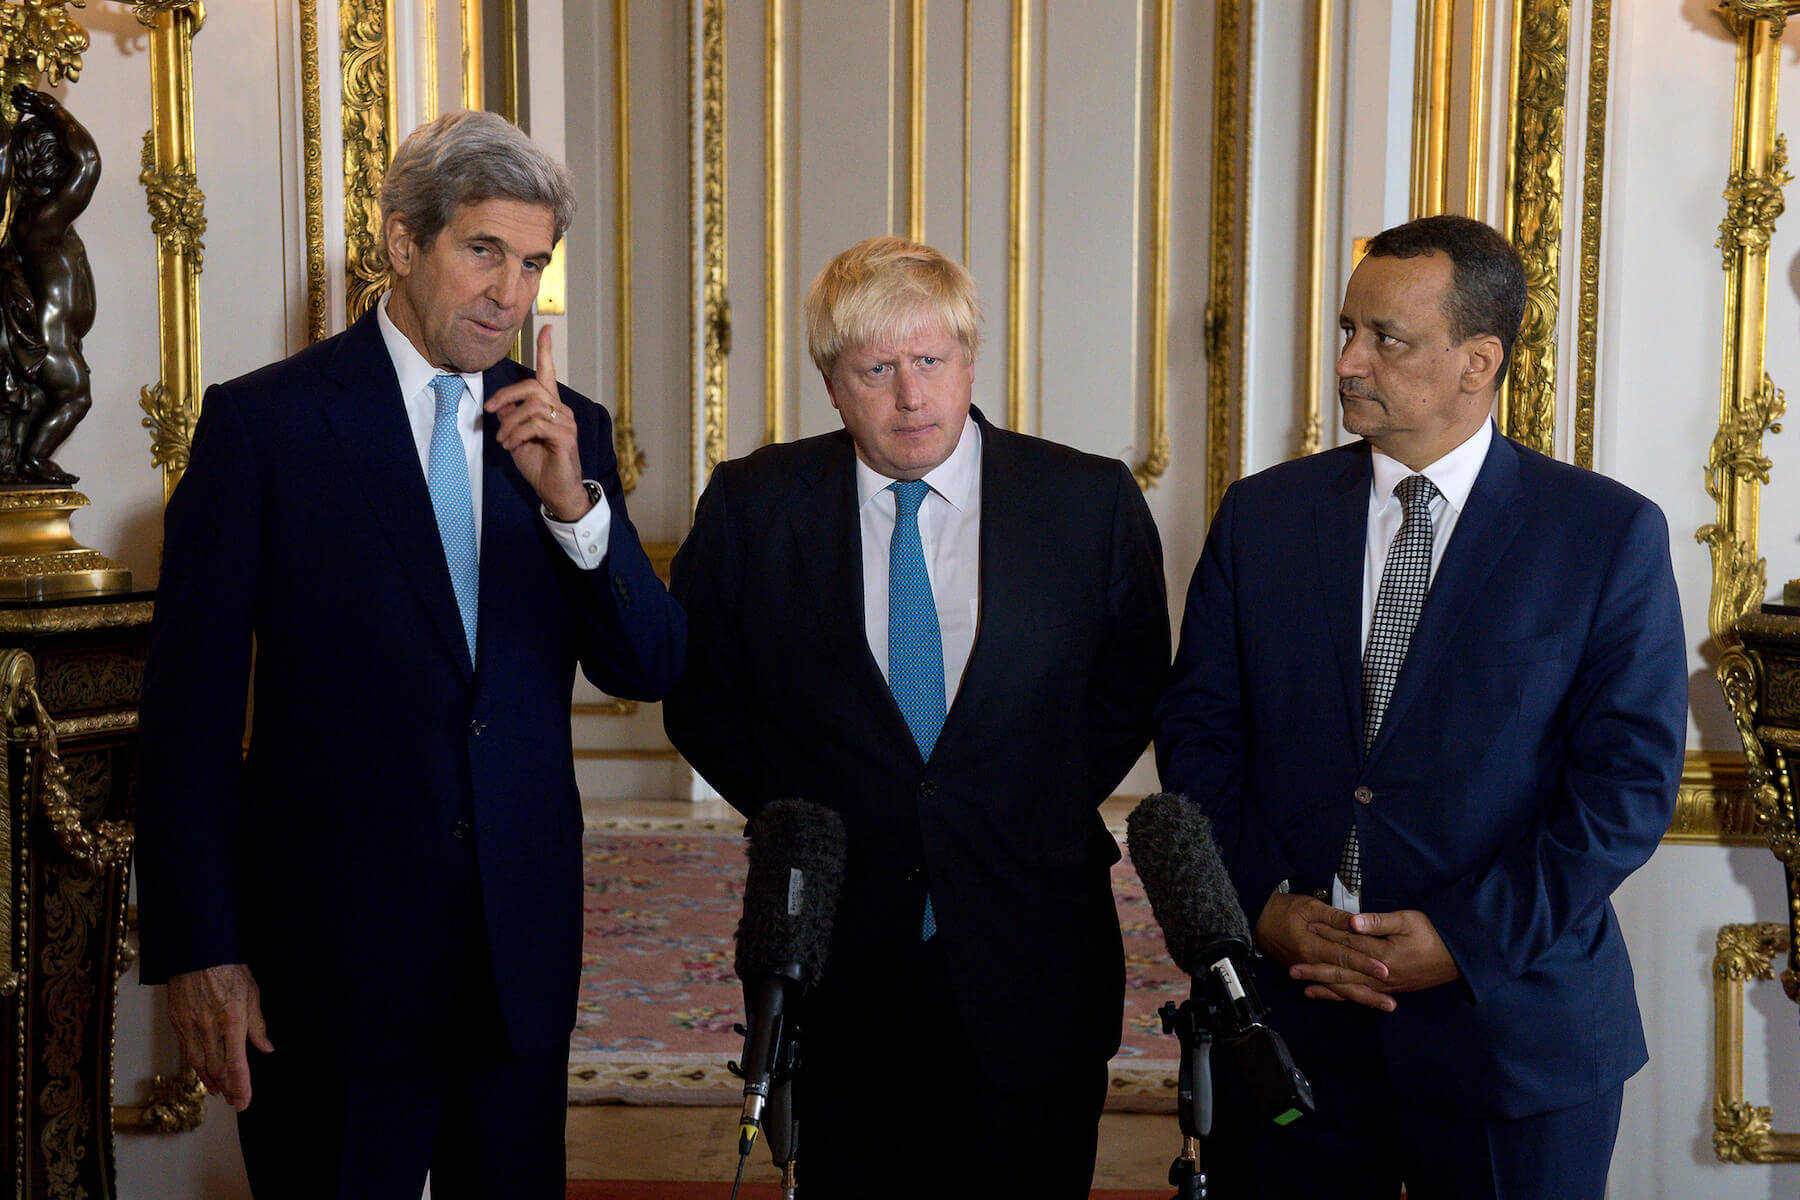 US Secretary of State John Kerry, British Foreign Secretary Boris Johnson and UN Special Envoy for Yemen Ismail Ould Cheikh Ahmed